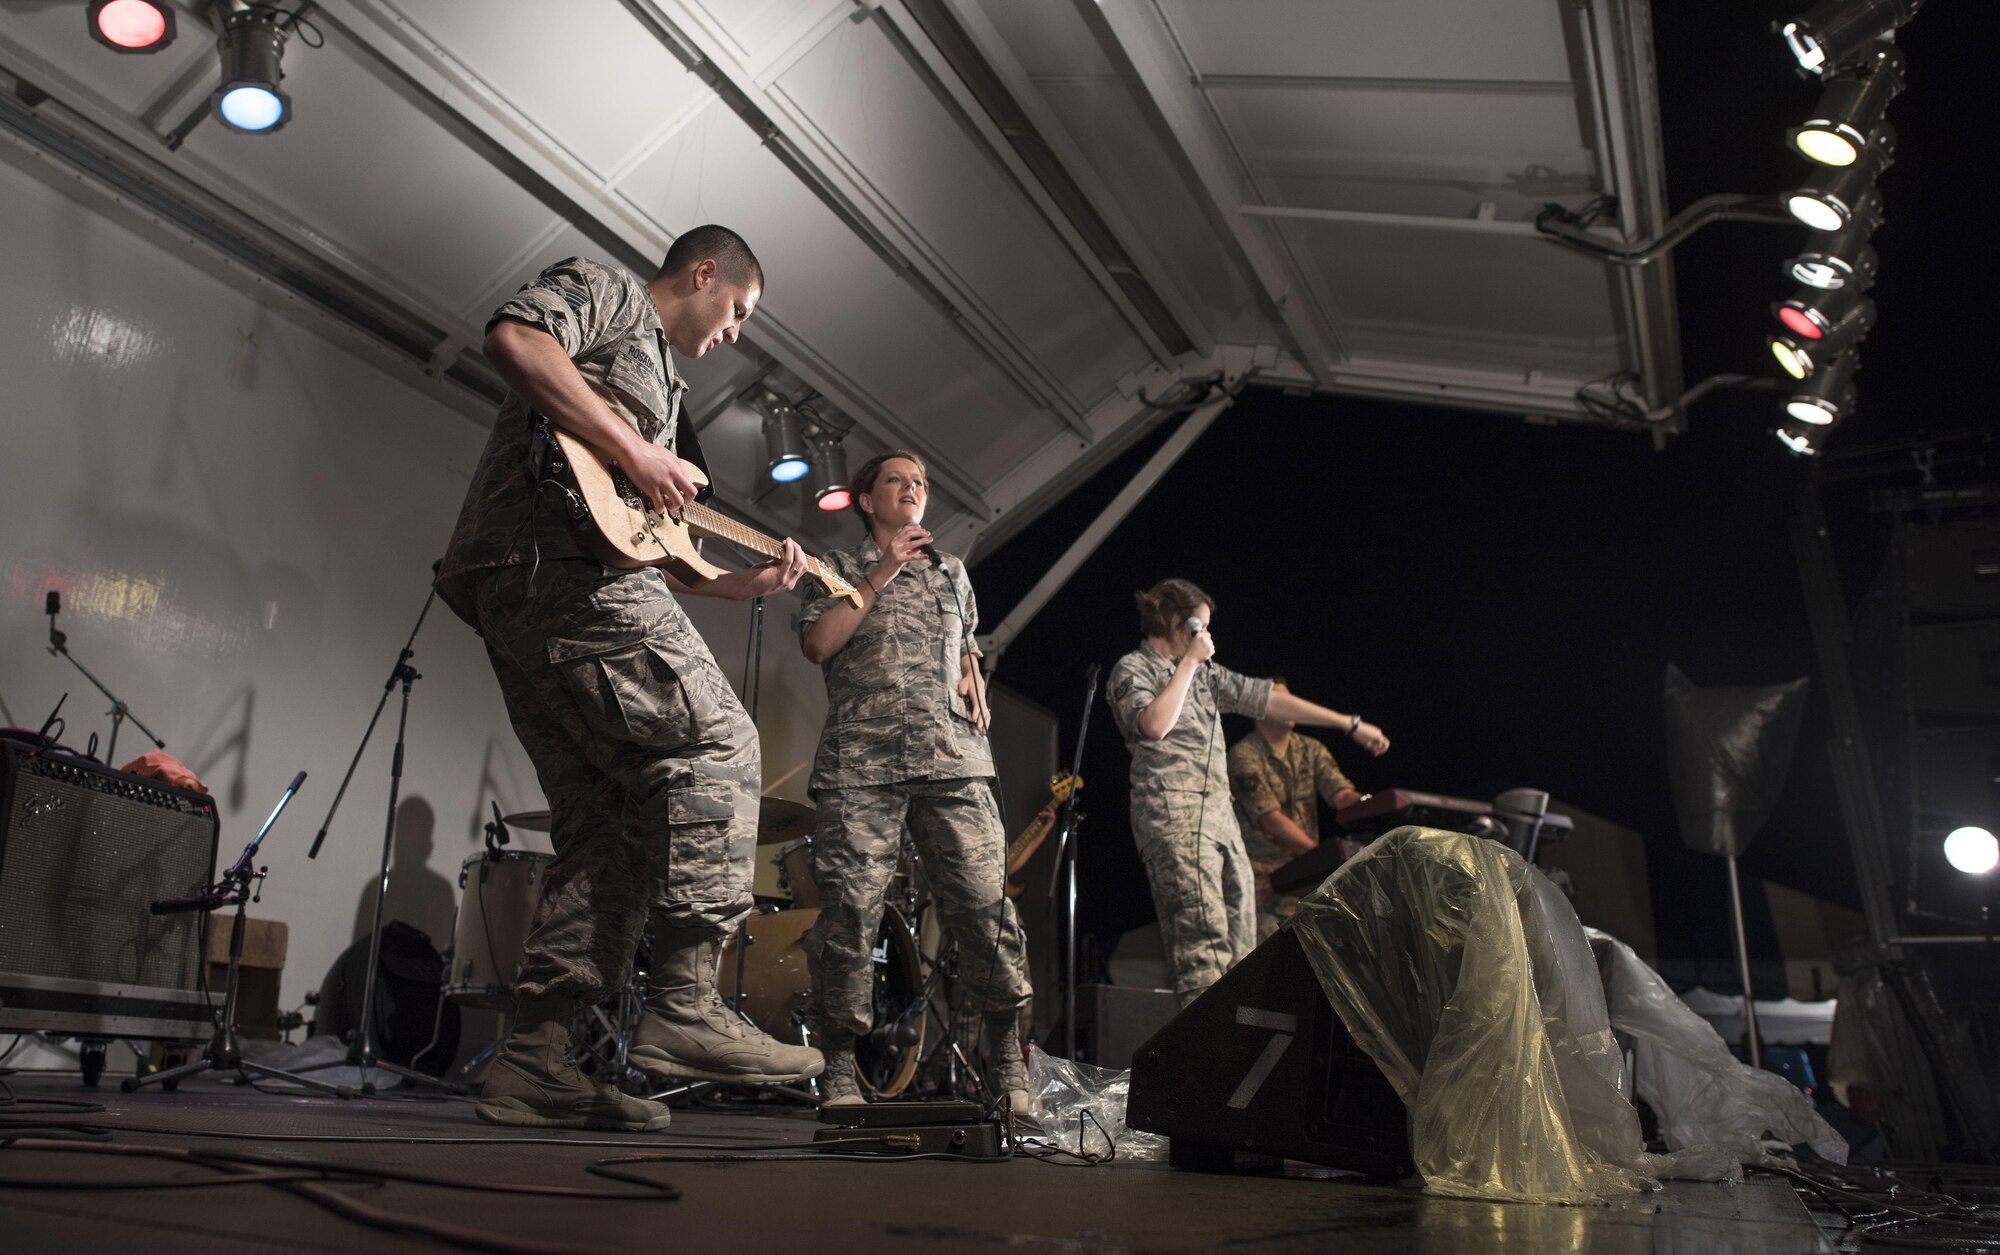 The Band of the Pacific-Asia performs during the 2016 Japanese-American Friendship Festival at Yokota Air Base, Japan, Sept. 17, 2016. The festival gives community members a chance to come onto Yokota to see static aircraft, witness military demonstrations, learn about the capabilities and training done at Yokota and to meet with the US and Japan Self-Defense Force members who work and live here. (U.S. Air Force photo by Staff Sgt. Cody H. Ramirez/Released)